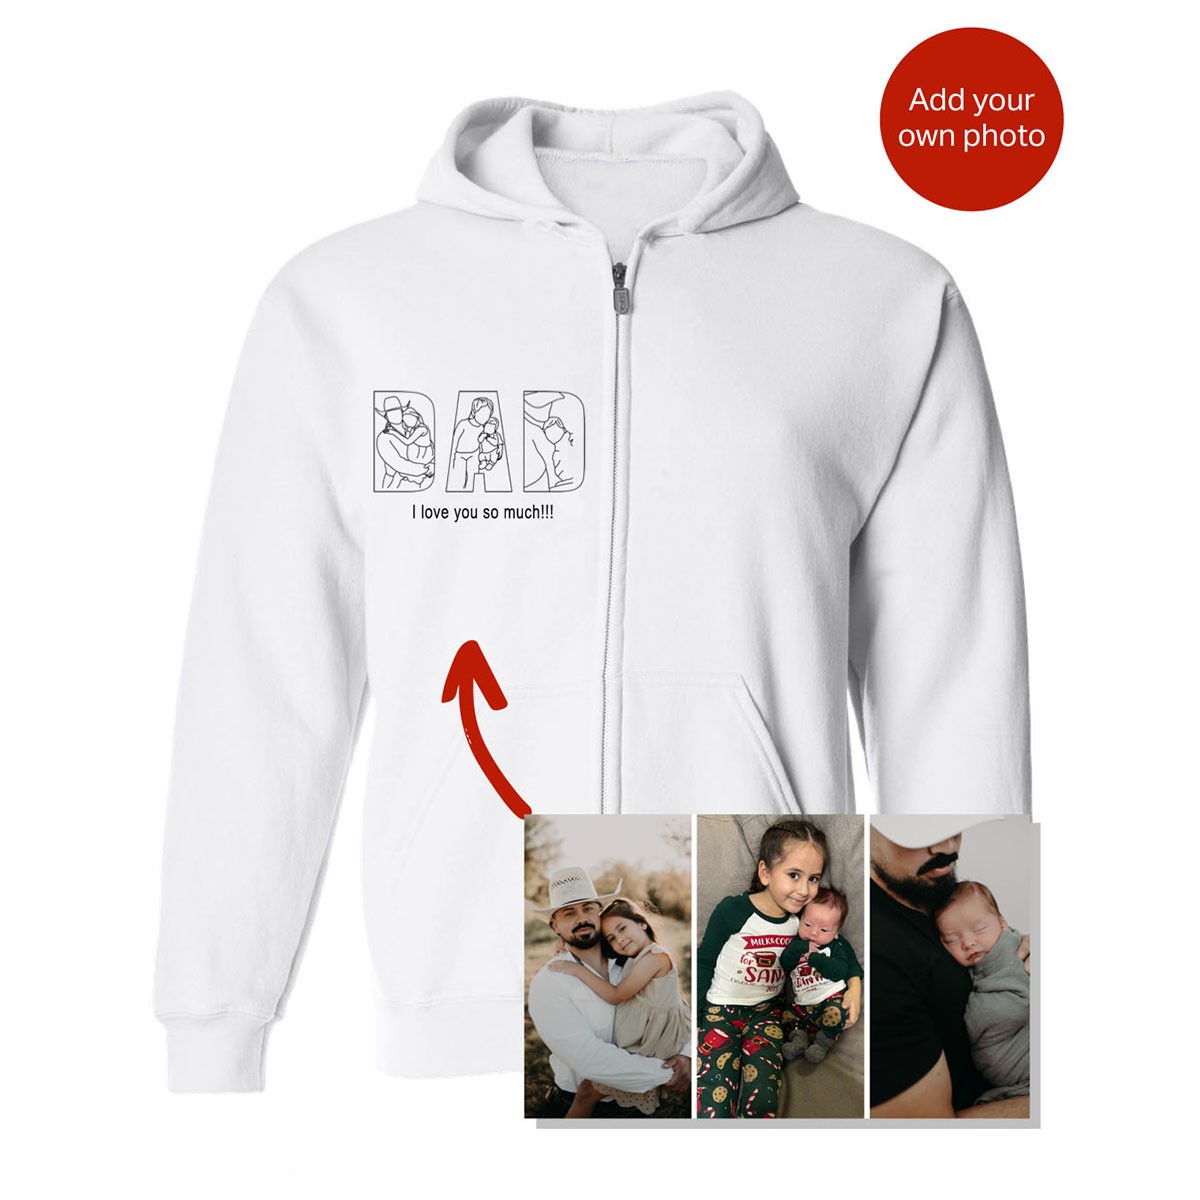 Personalized Embroidered Dad Portrait Zip Up Hoodie Sweatshirt Gift For Father's Day